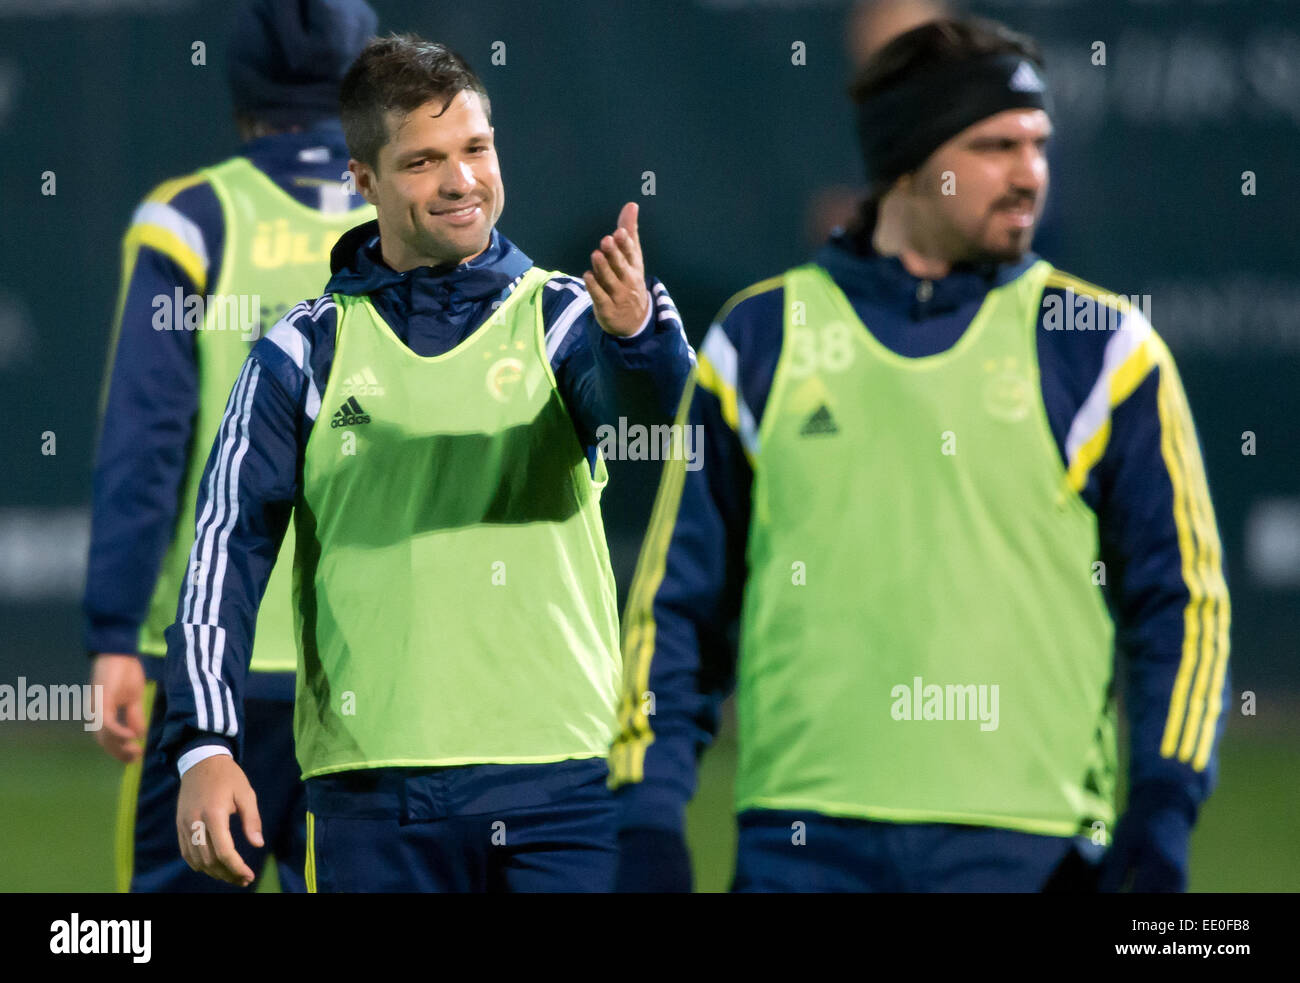 Belek, Turkey. 11th Jan, 2015. Fenerbahce Istanbul's soccer player Diego Ribas (L) gestures to Mehmet Topuz during a training session in Belek, Turkey, 11 January 2015. Fenerbahce stays in Belek to prepare for the second half of the Süper Lig season. Photo: Soeren Stache/dpa/Alamy Live News Stock Photo